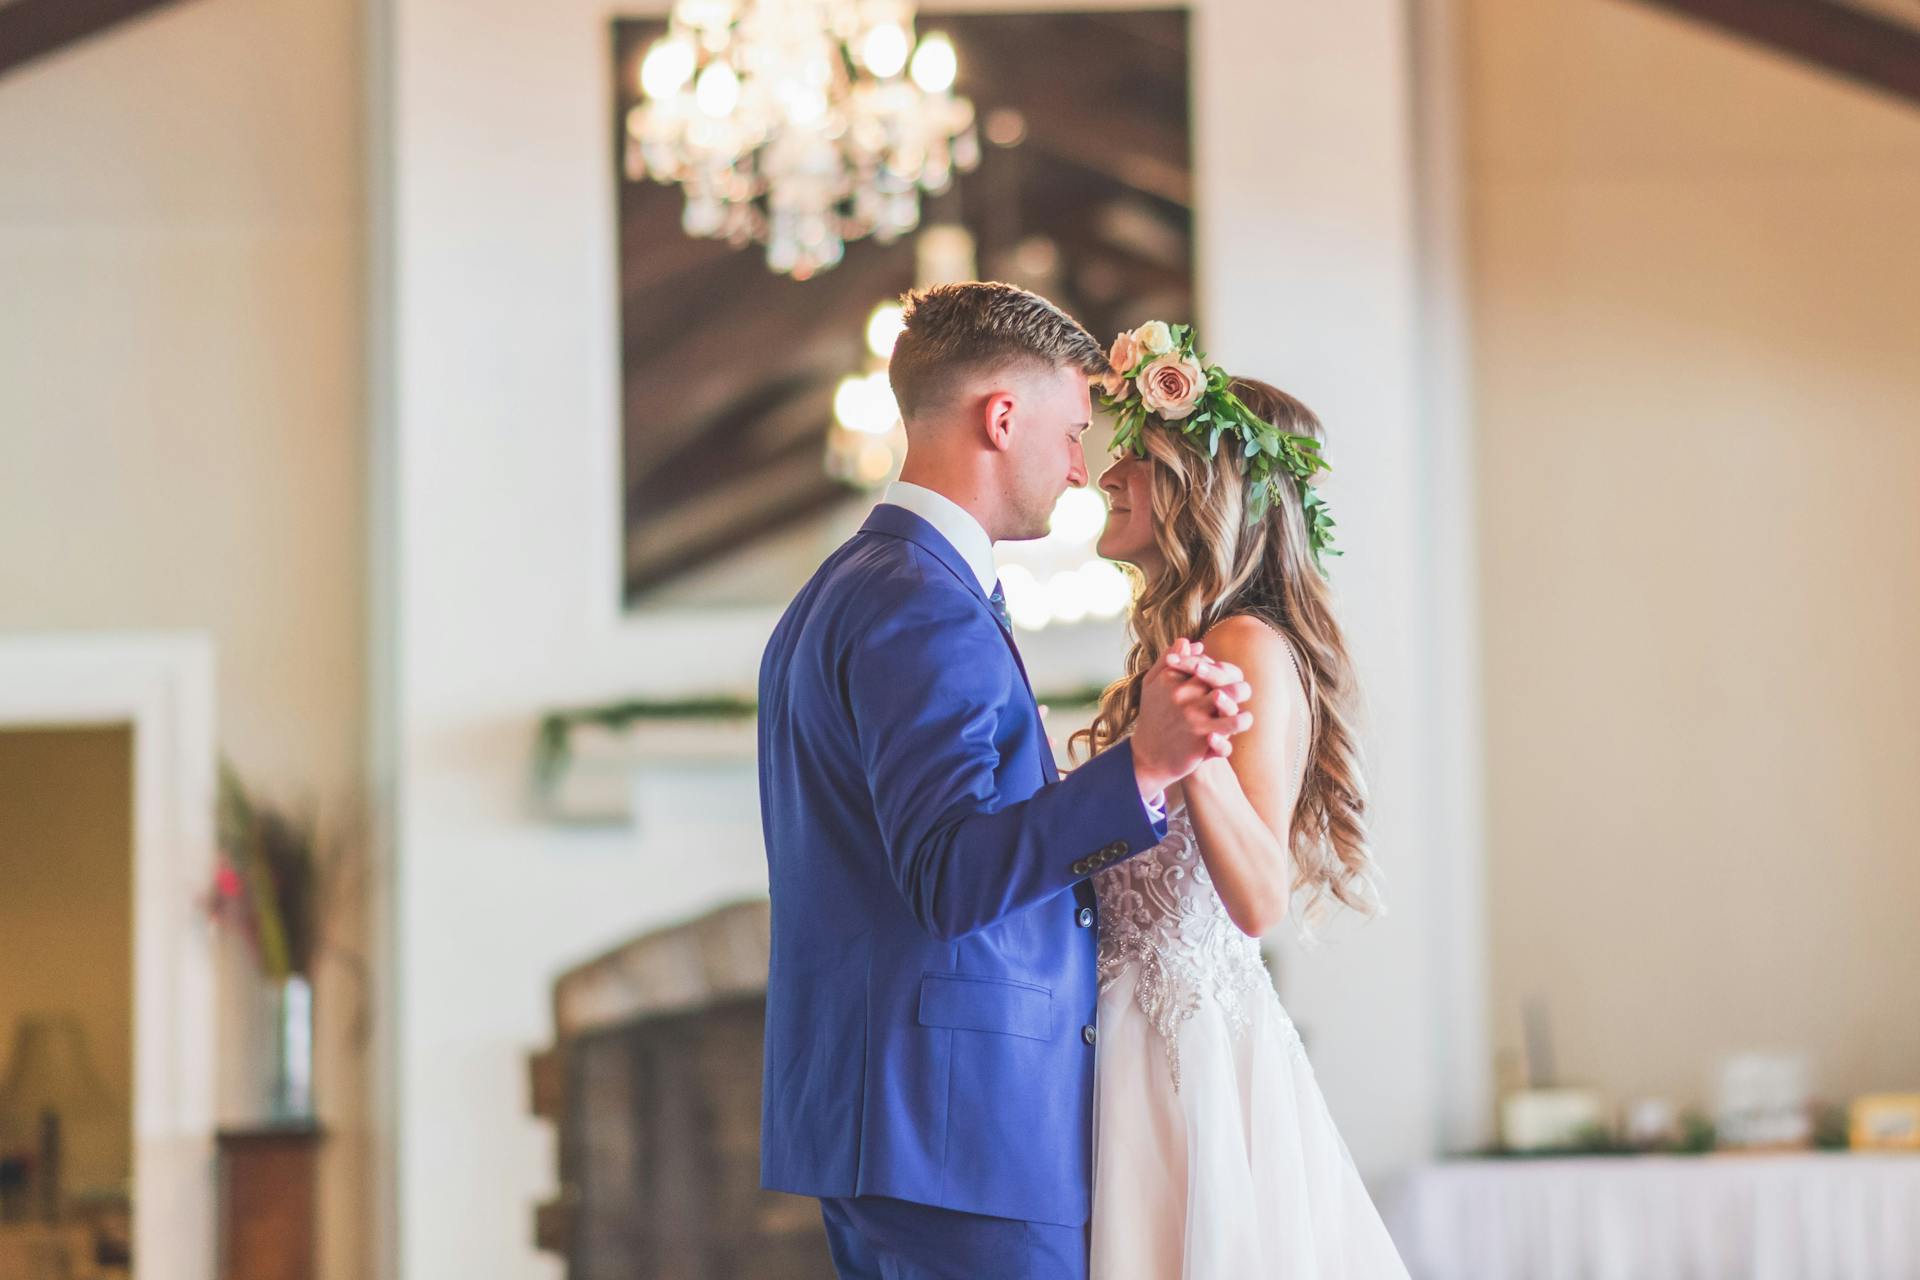 A newlywed couple dancing | Source: Pexels